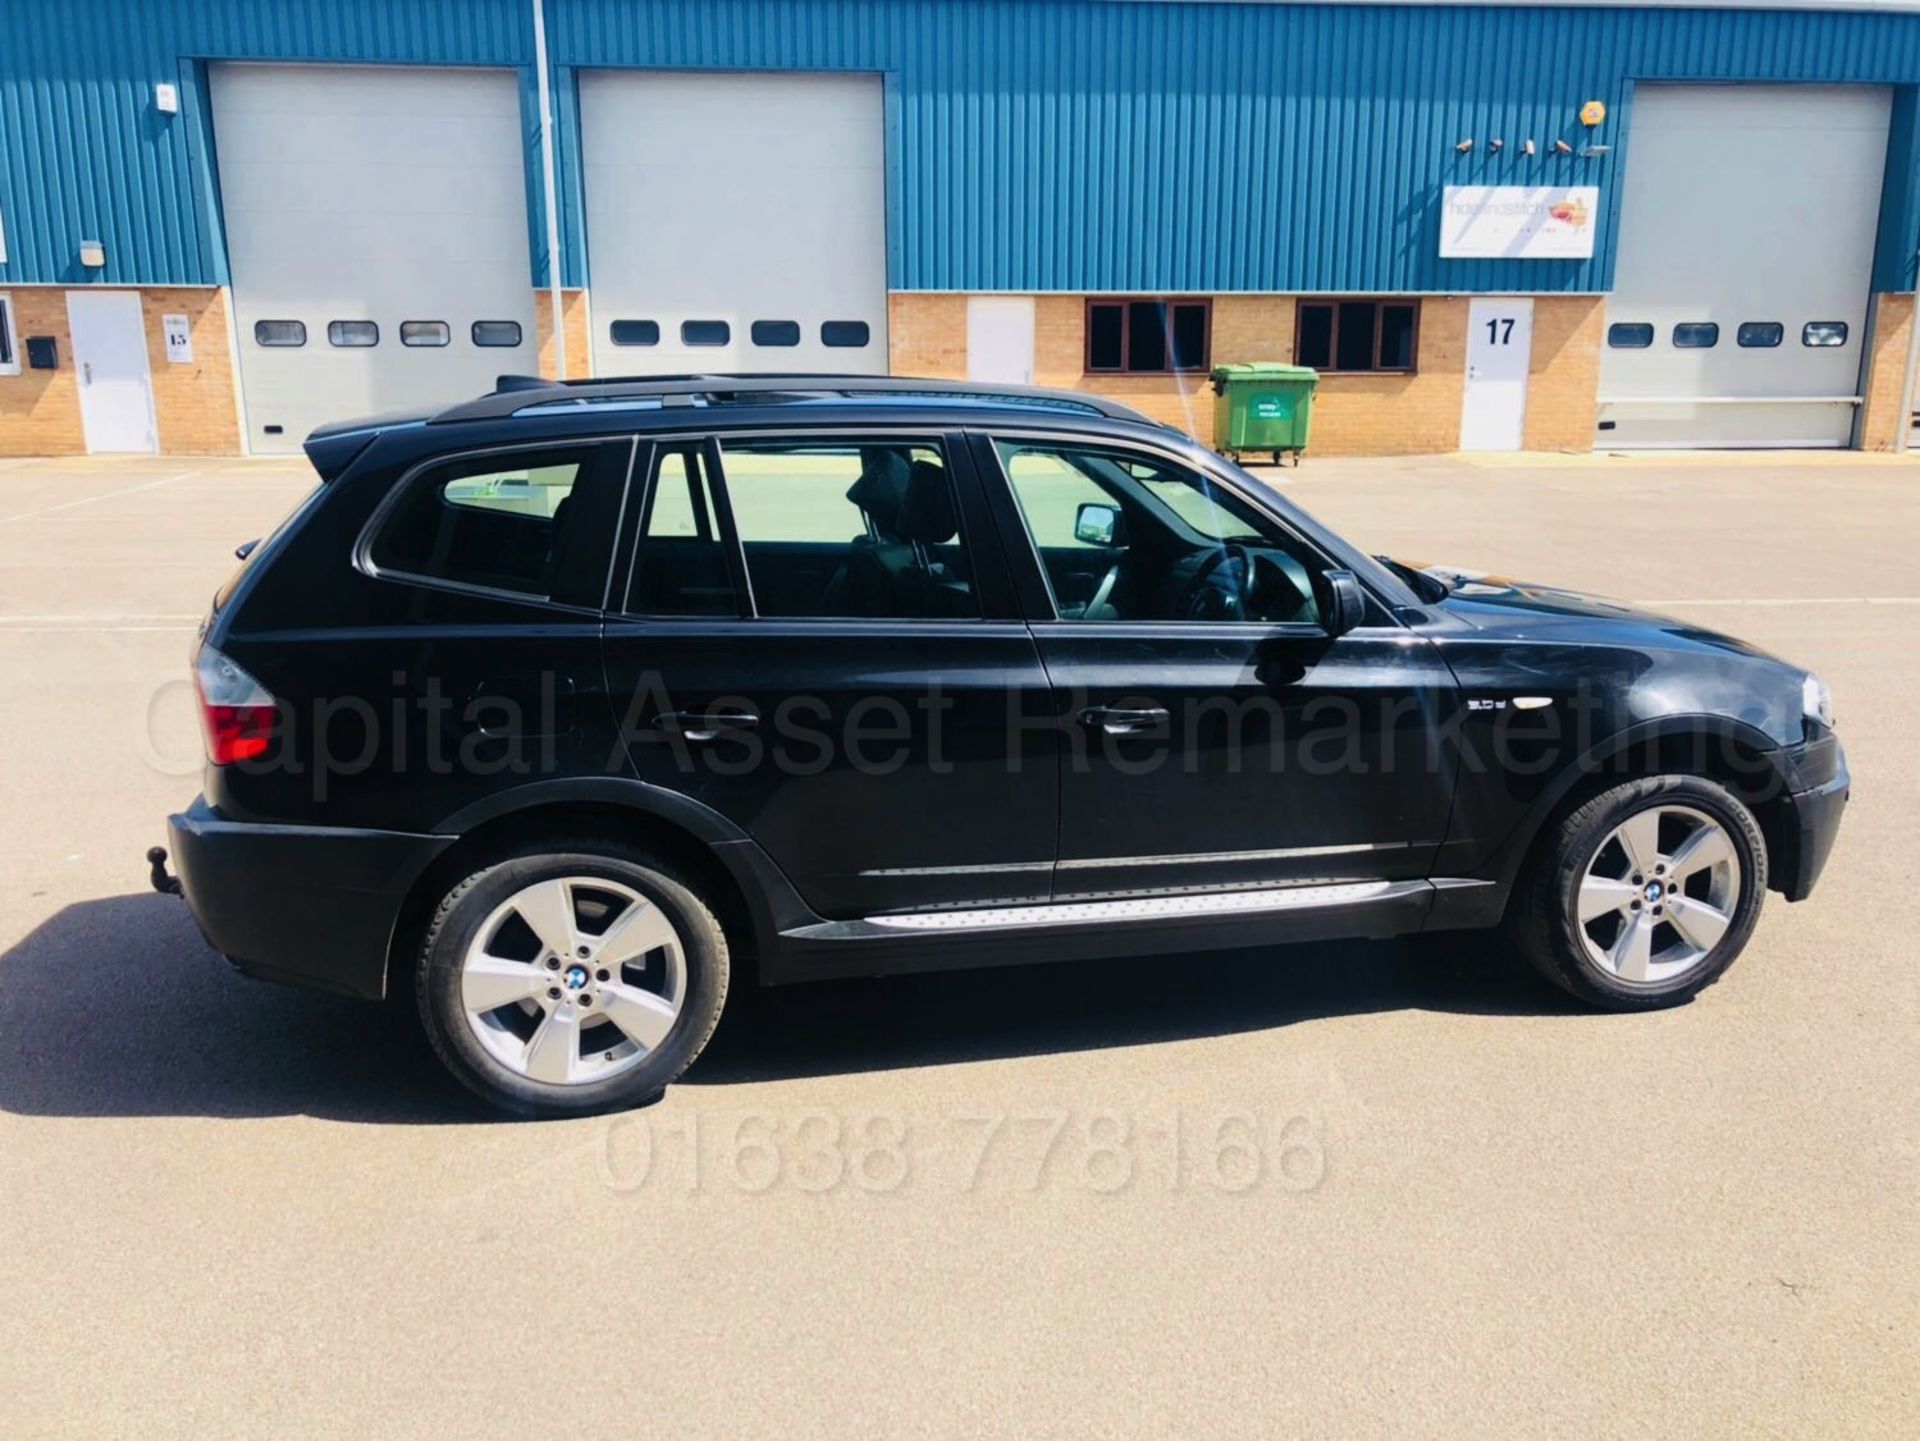 BMW X3 *SPORT EDITION* (2006) '3.0 DIESEL - 218 BHP - AUTOMATIC' *LEATHER / AIR CON* (NO VAT) - Image 25 of 29